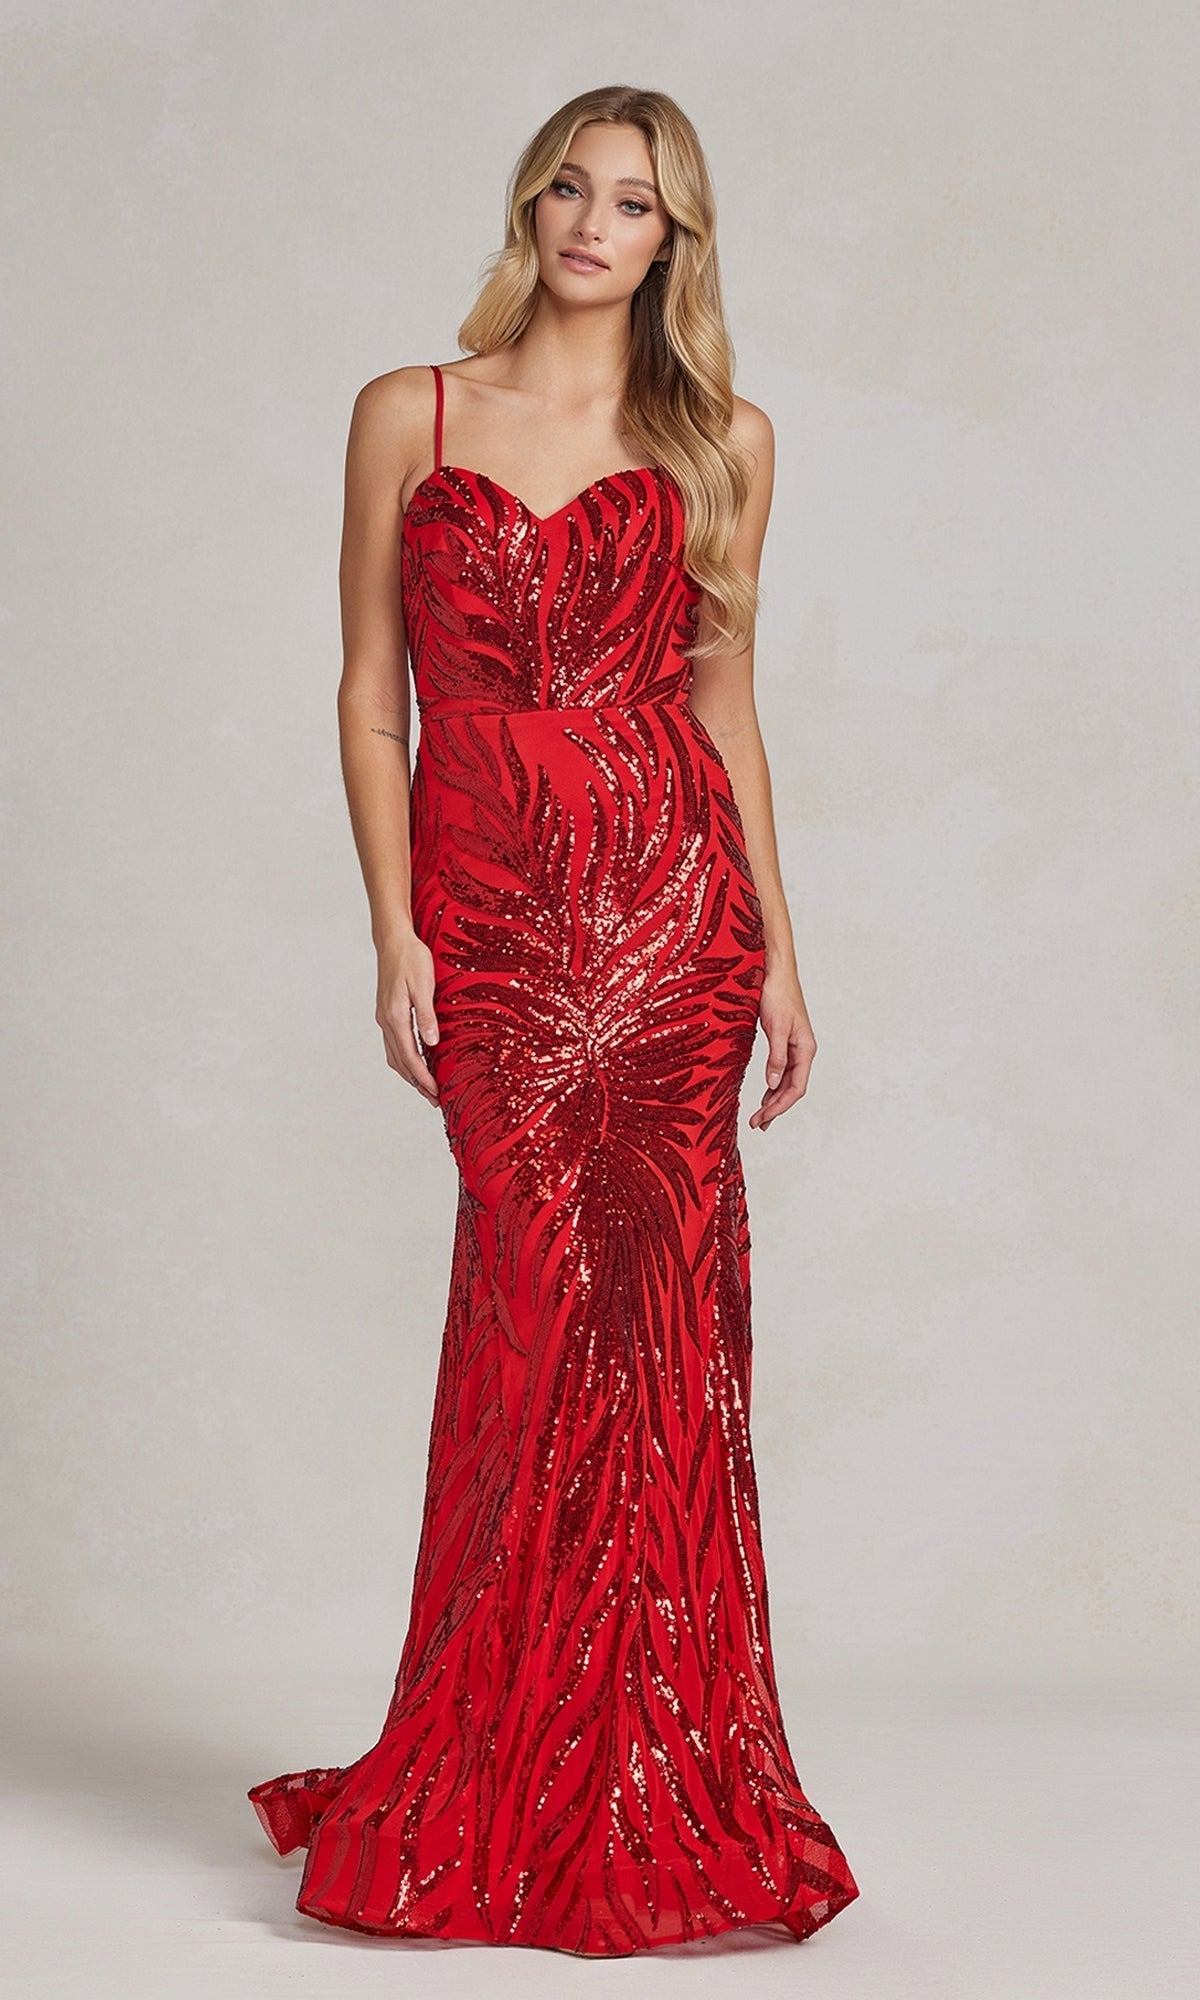 Red Iridescent Sequin-Pattern Long Prom Dress R1072